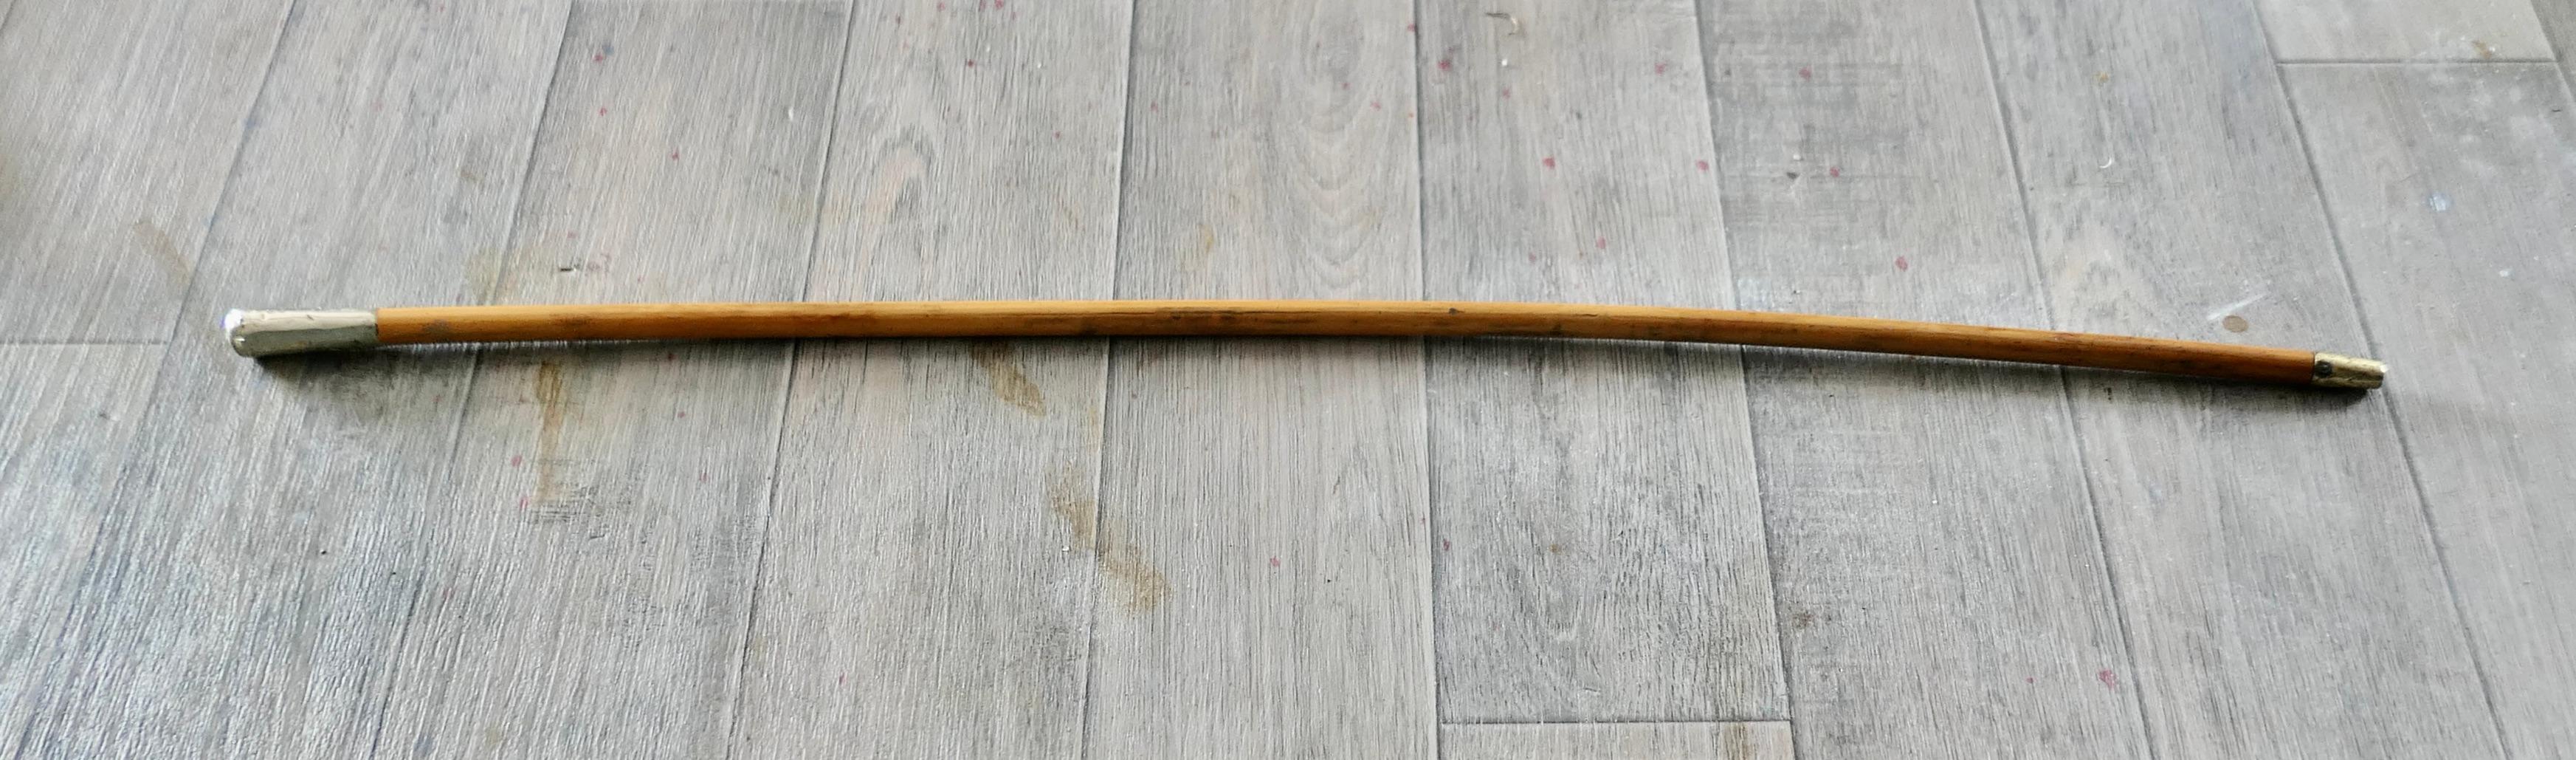 Swagger Stick from The Queen’s Own Royal West Kent Regiment 


Superb vintage Military swagger stick The Queen’s Own Royal West Kent Regiment Malacca cane. The cane has slight curve but is still in good usable condition
The Stick is 26.5” long and